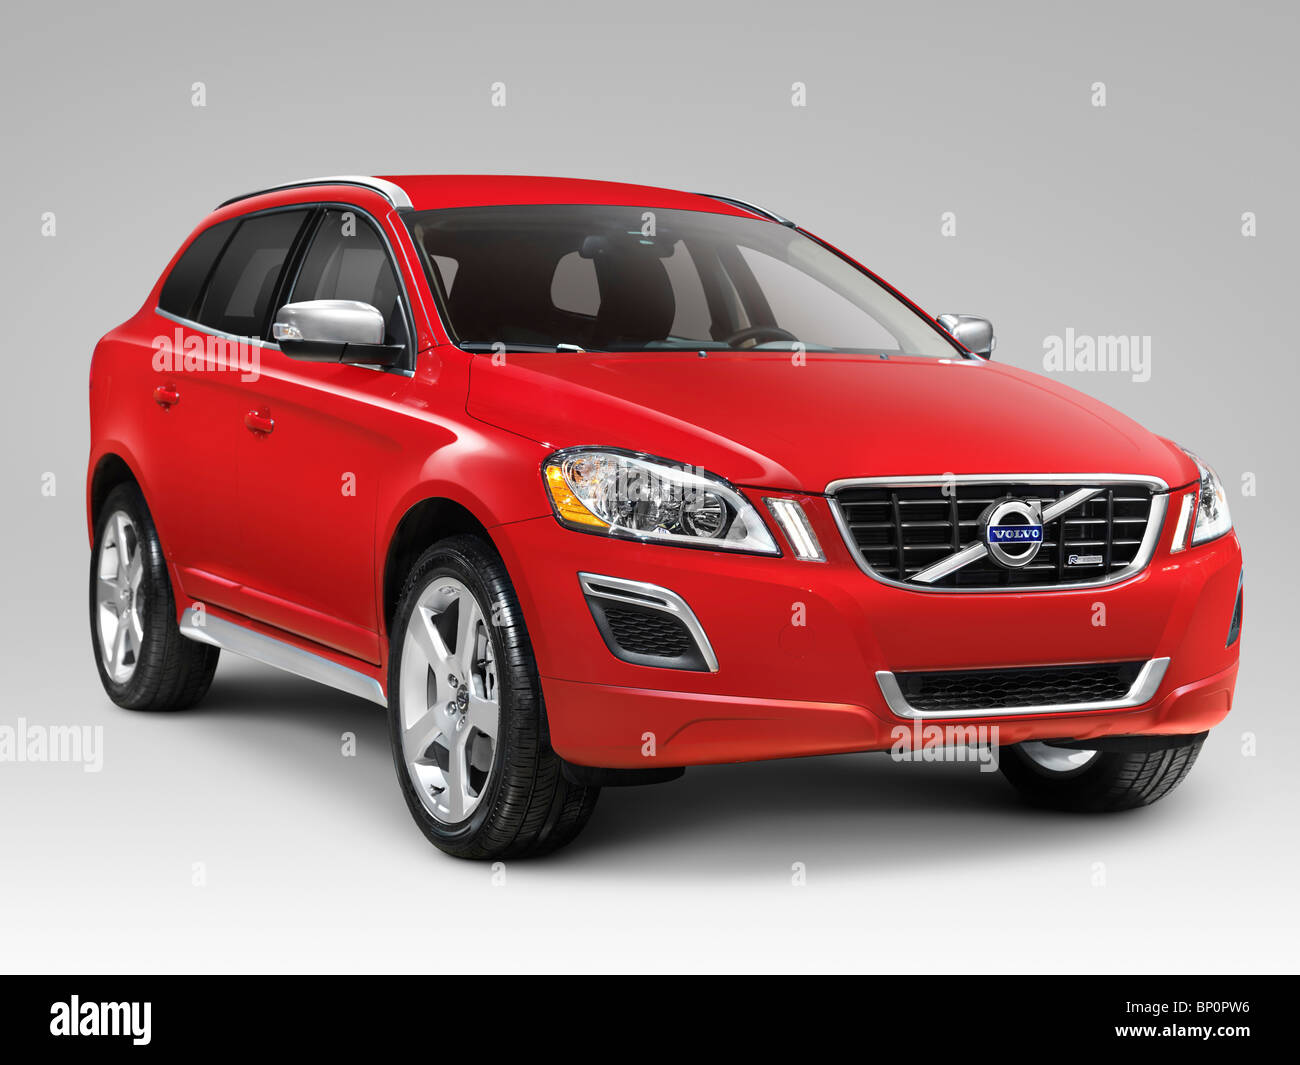 License available at MaximImages.com - Red 2010 Volvo XC60 T6 AWD R-Design midsize SUV the safest car to date. Isolated on gray background with clippi Stock Photo